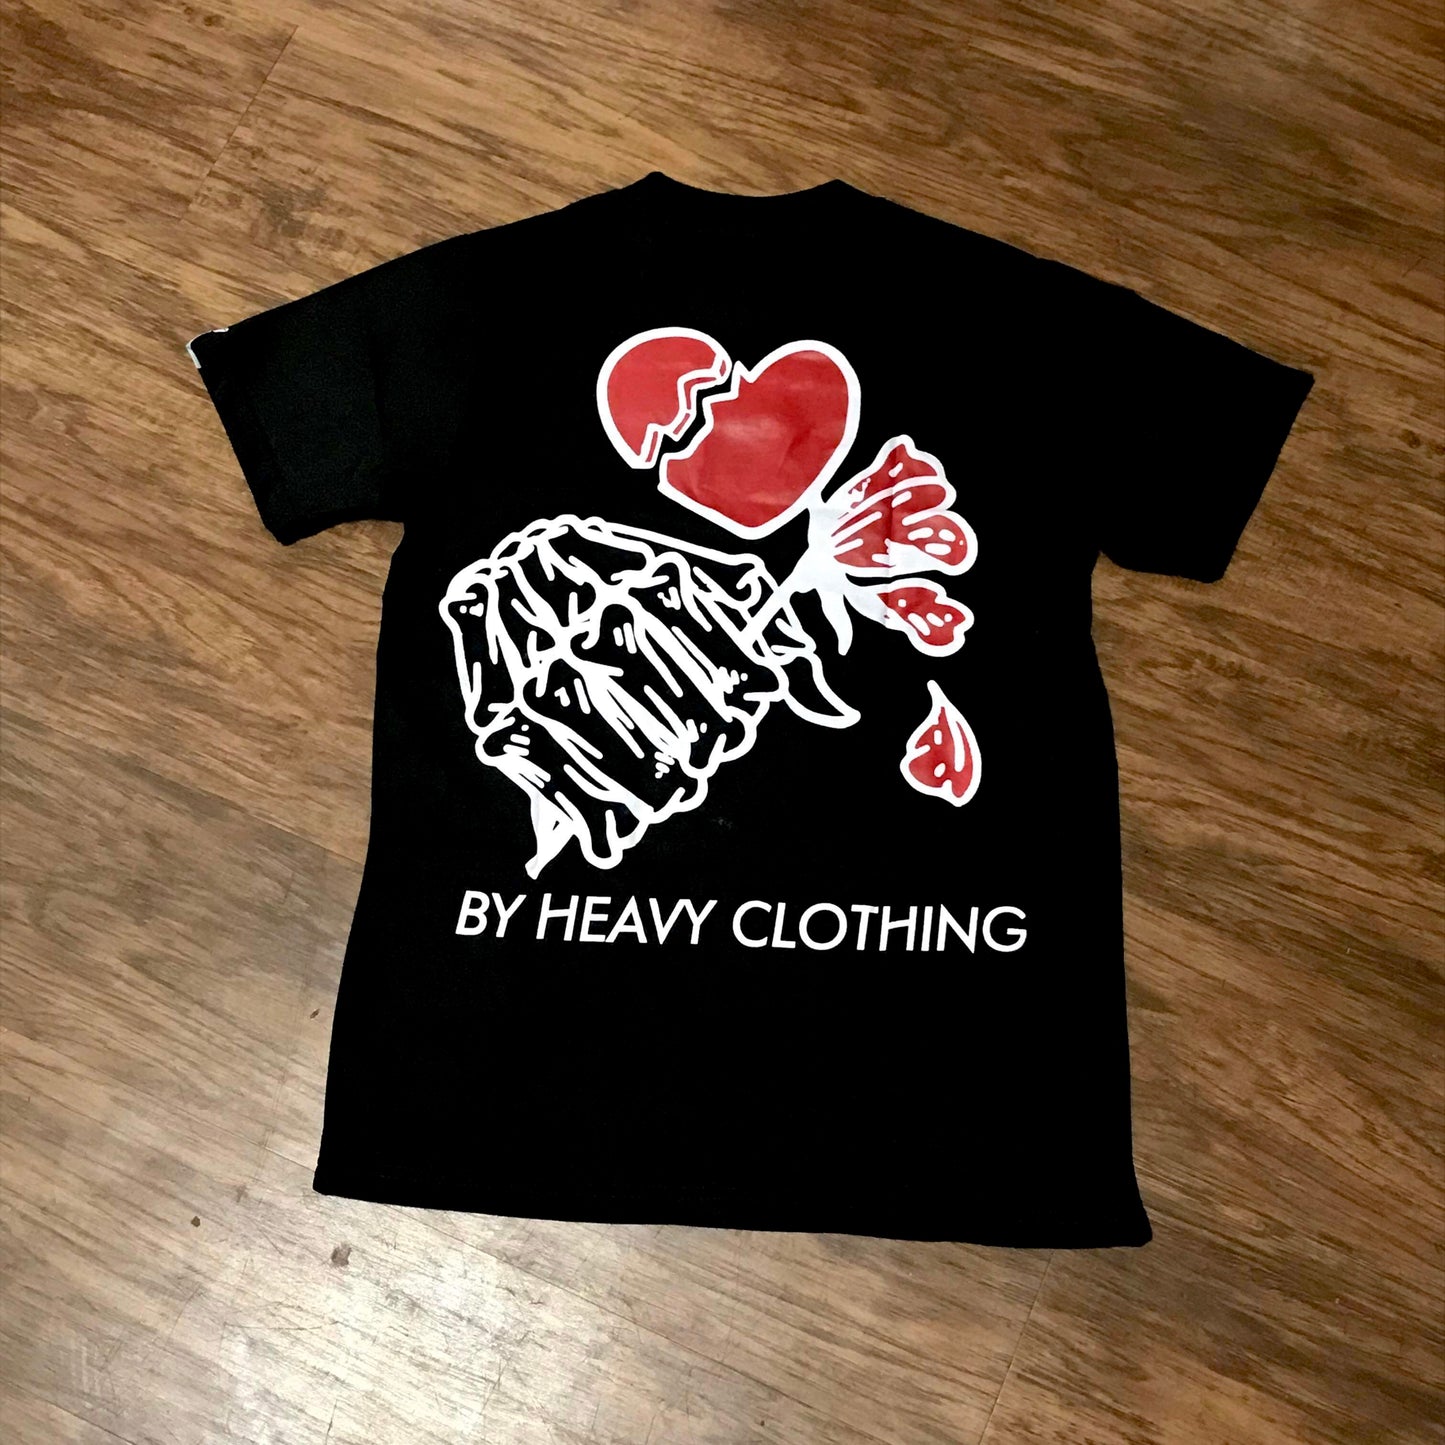 (By Heavy Clothing T Shirt)